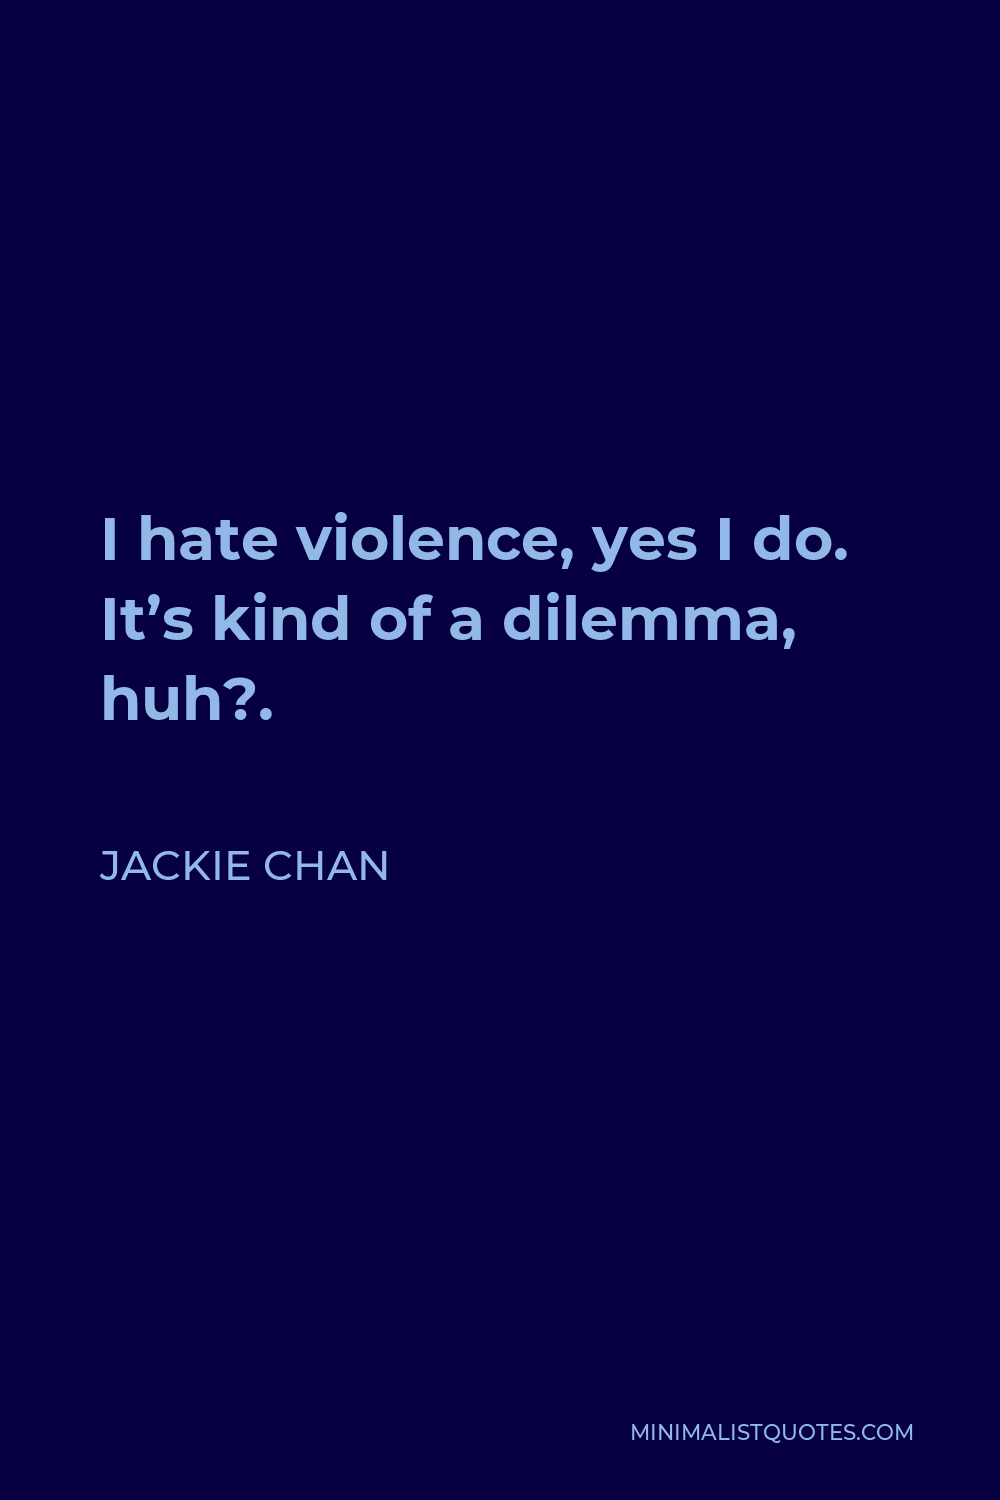 Jackie Chan Quote - I hate violence, yes I do. It’s kind of a dilemma, huh?.